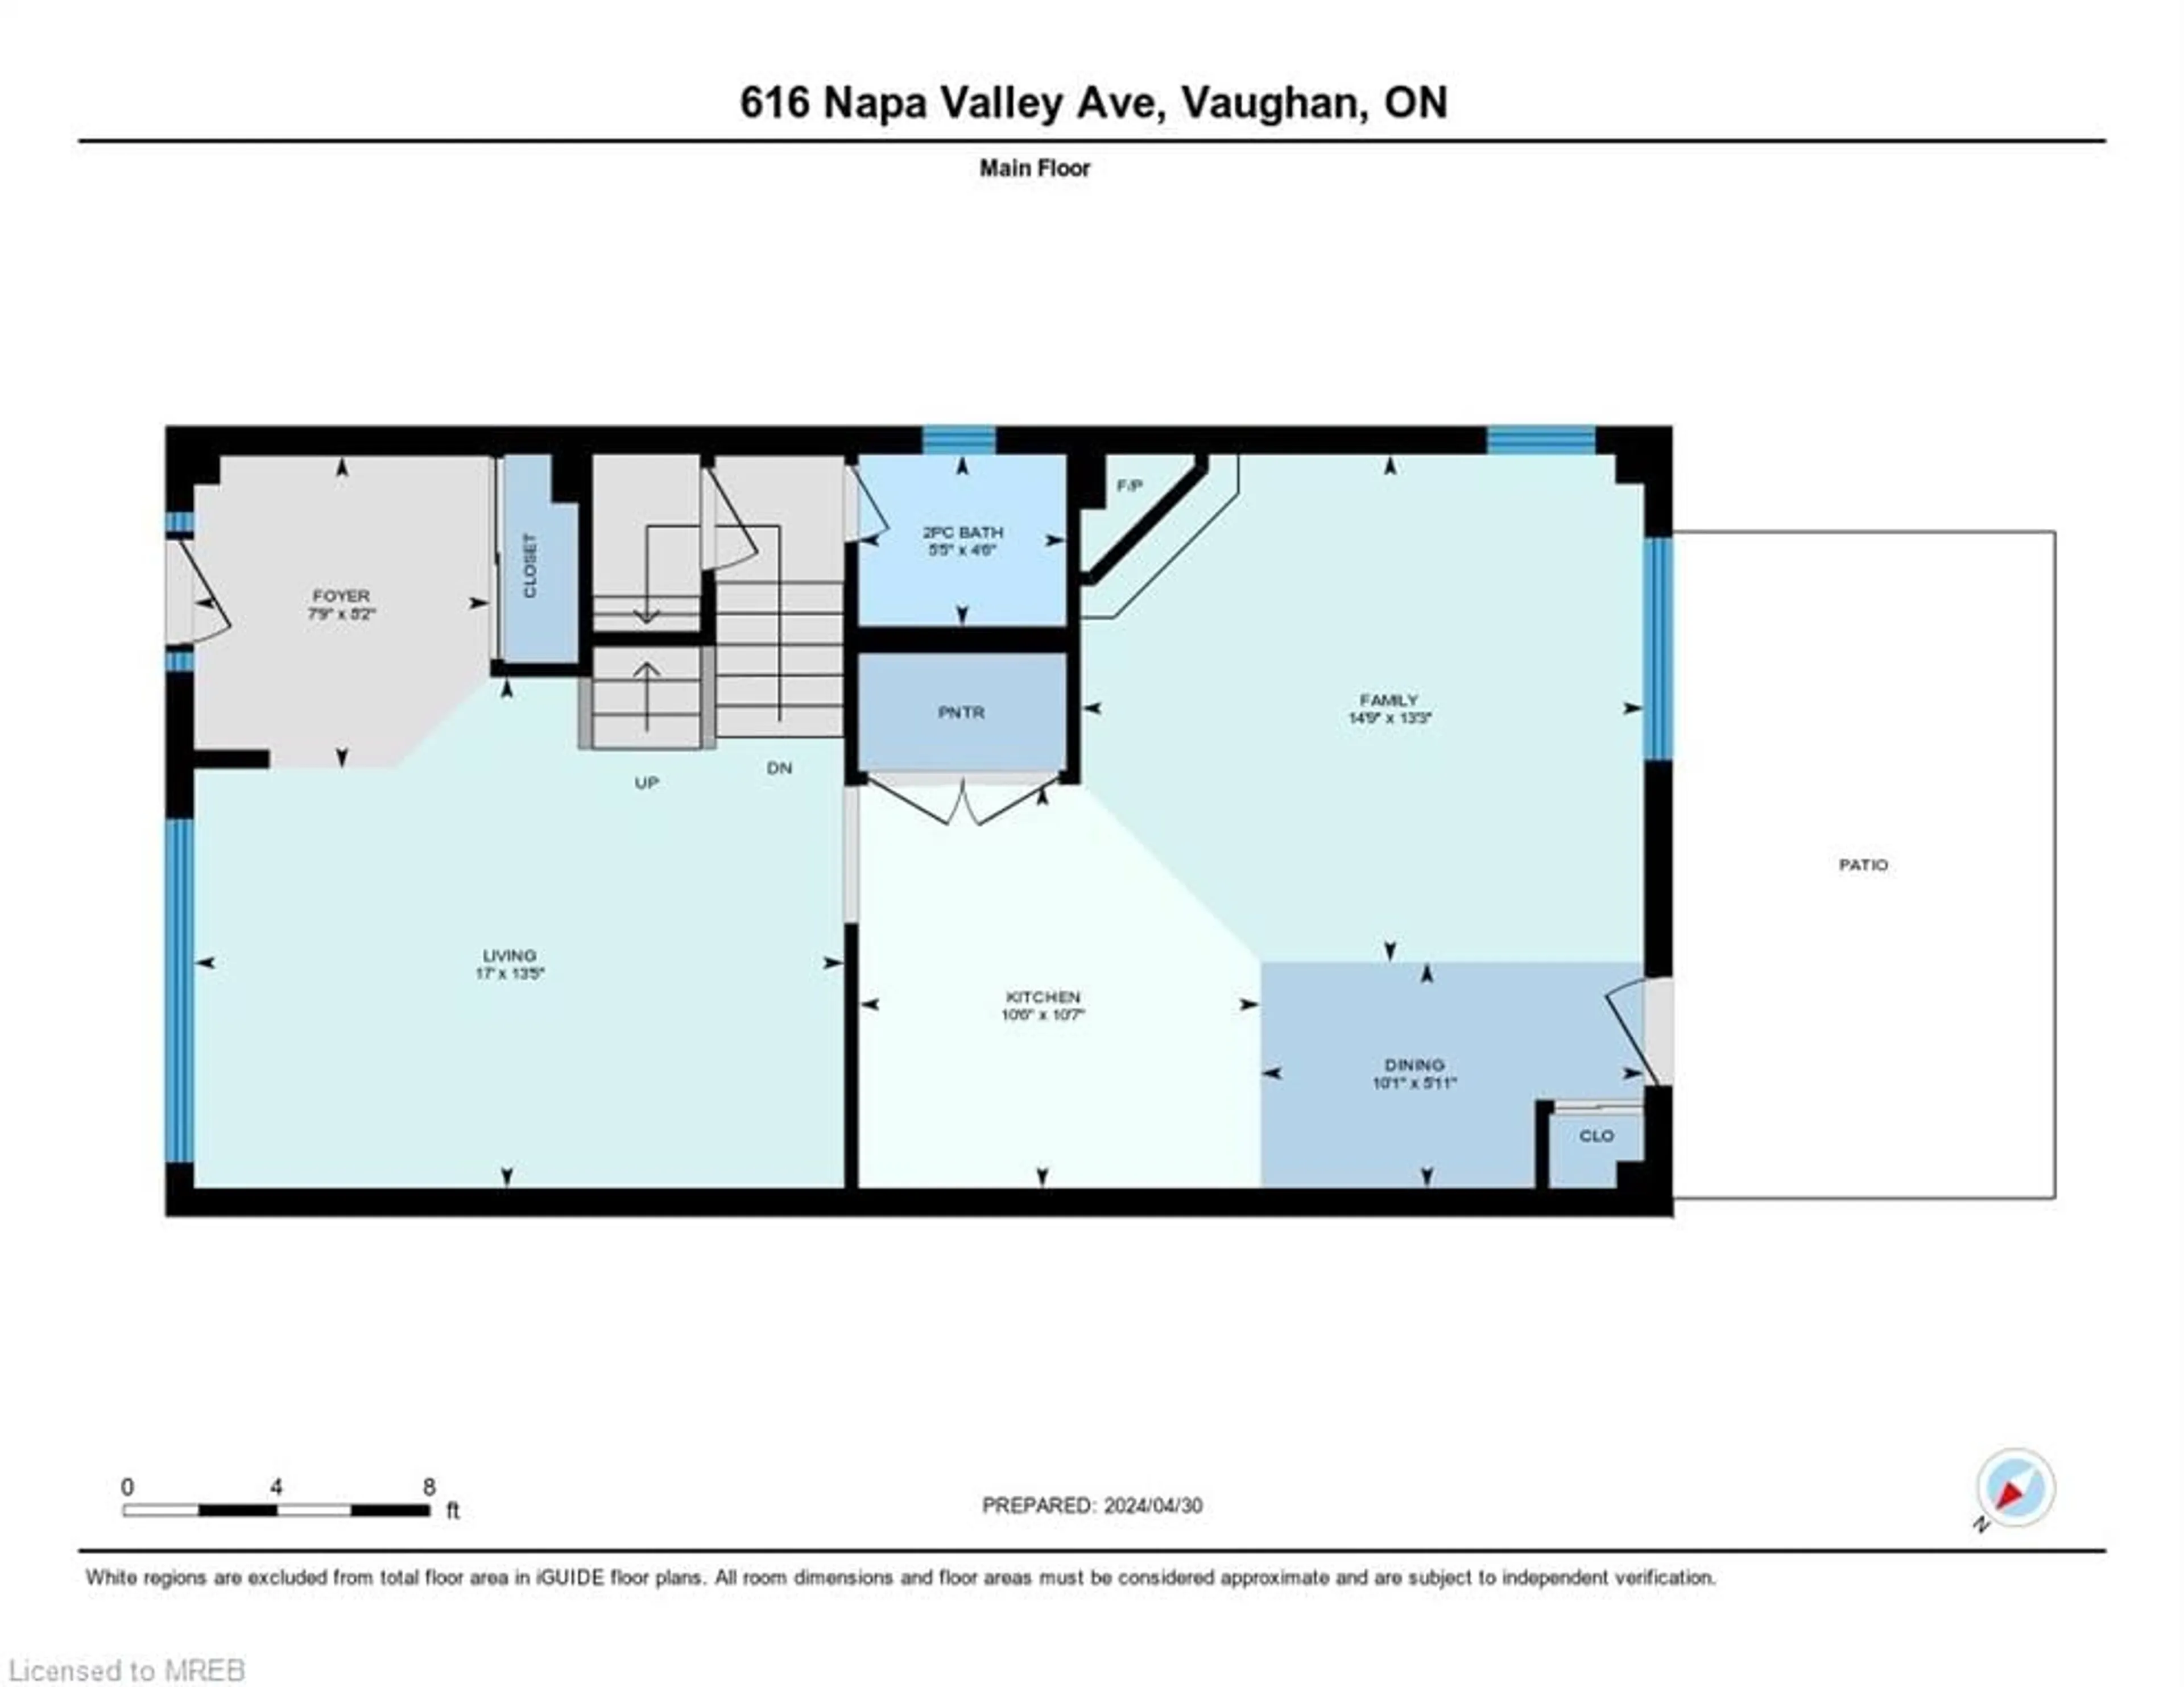 Floor plan for 616 Napa Valley Ave, Vaughan Ontario L4H 1R1